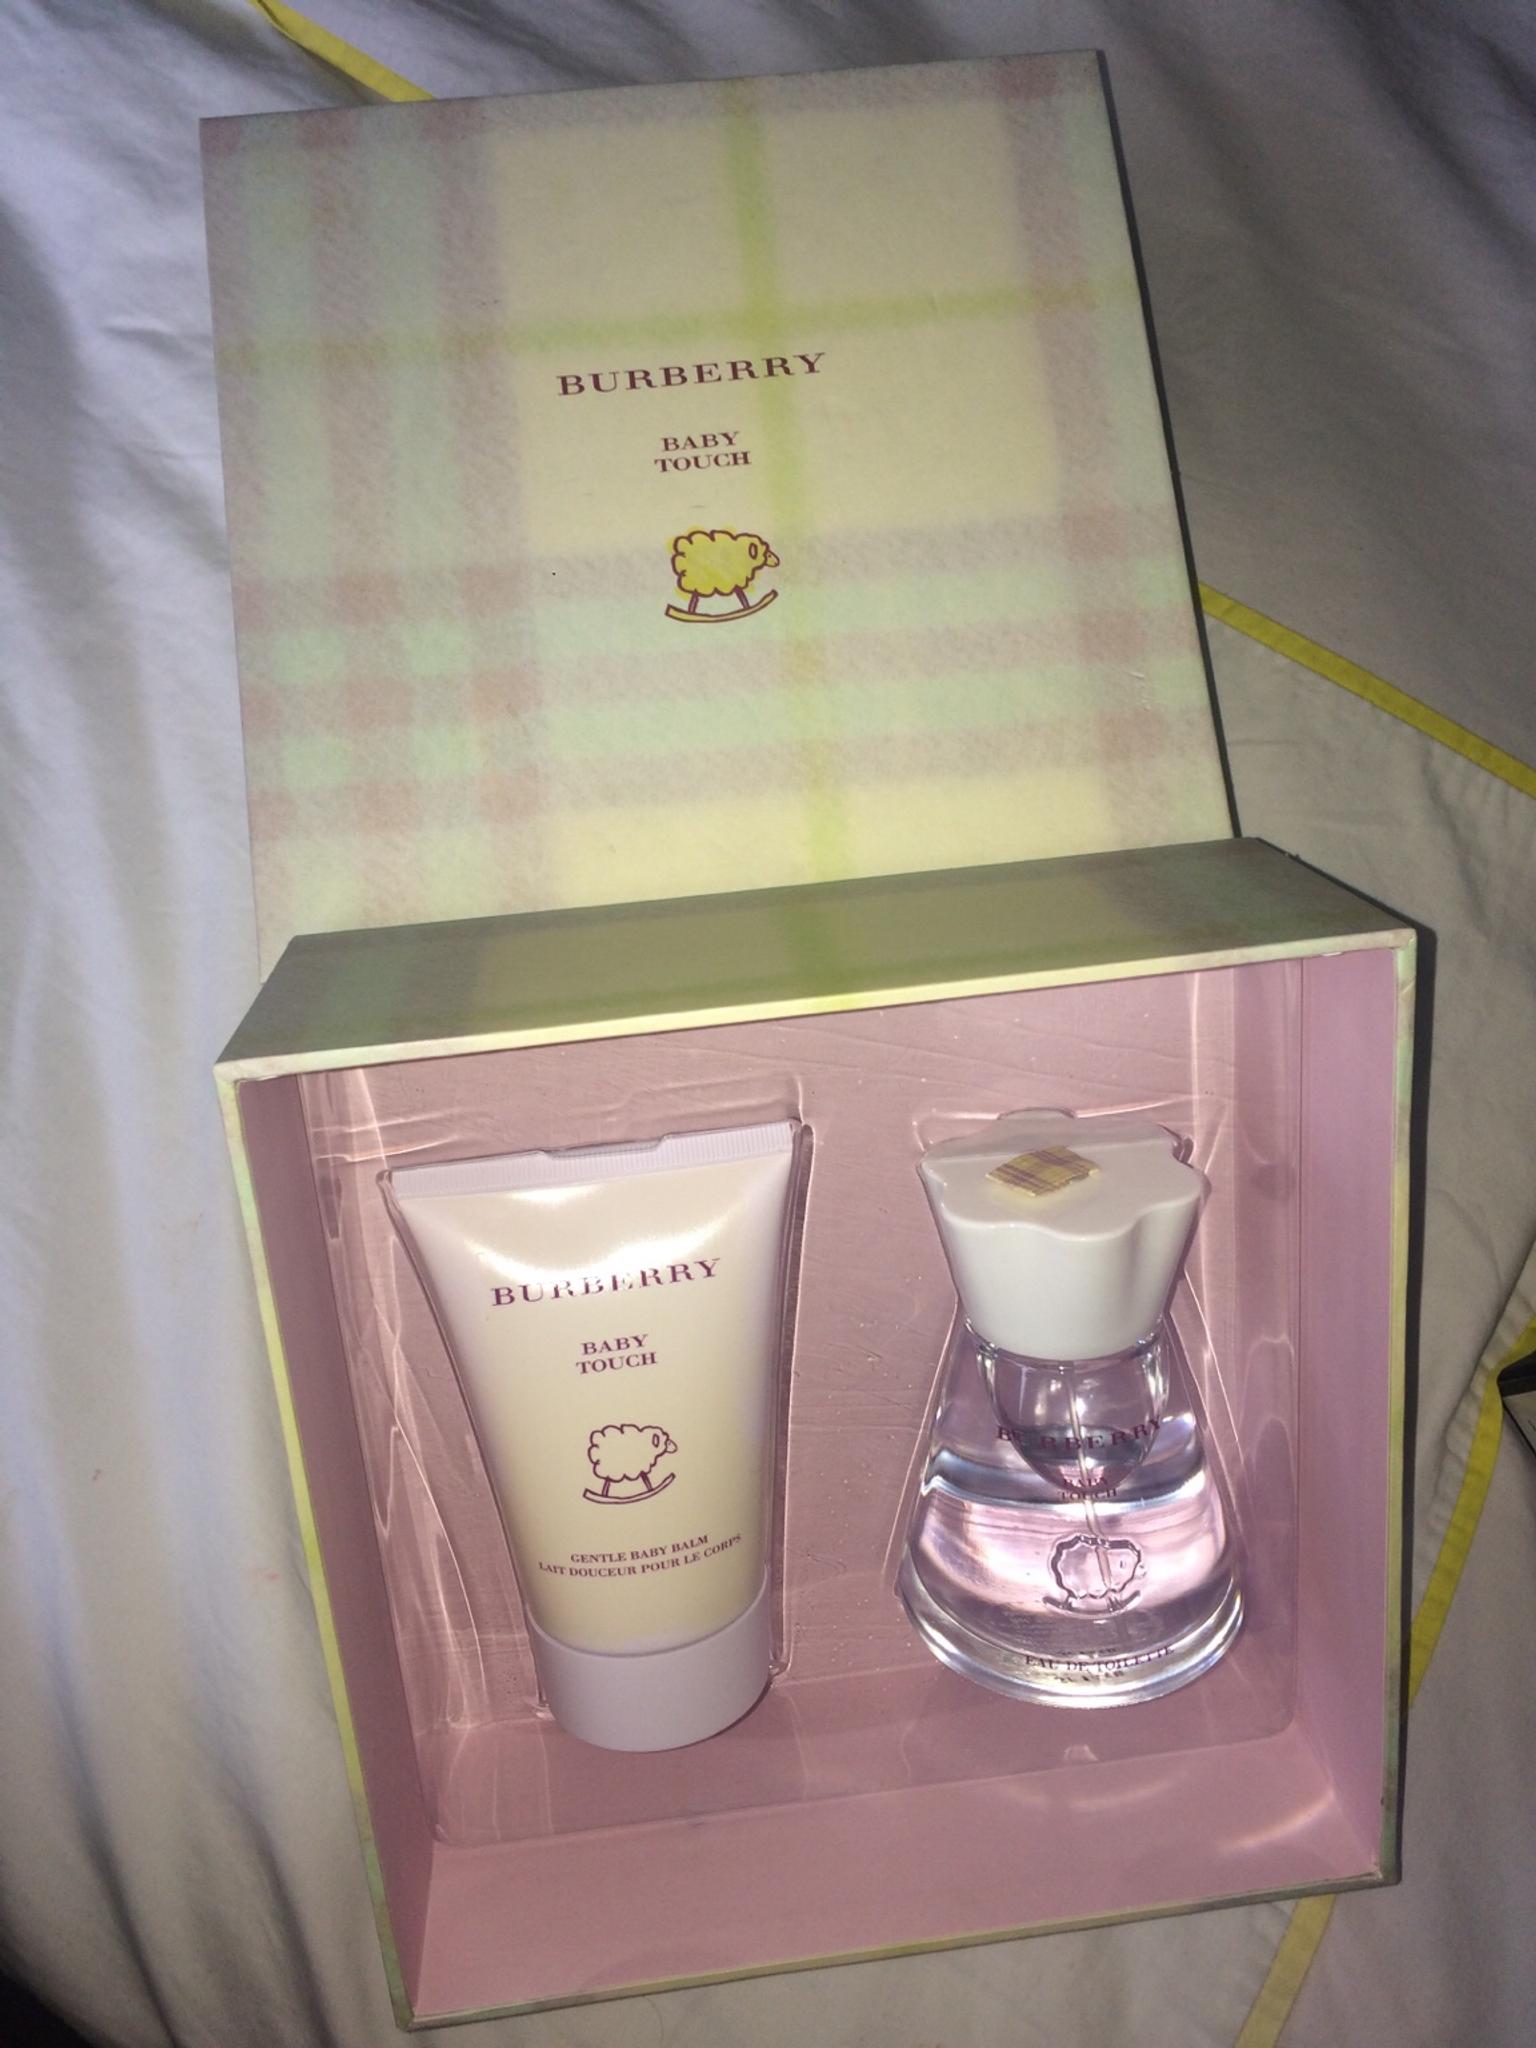 Burberry Baby Touch gift set in RM13 